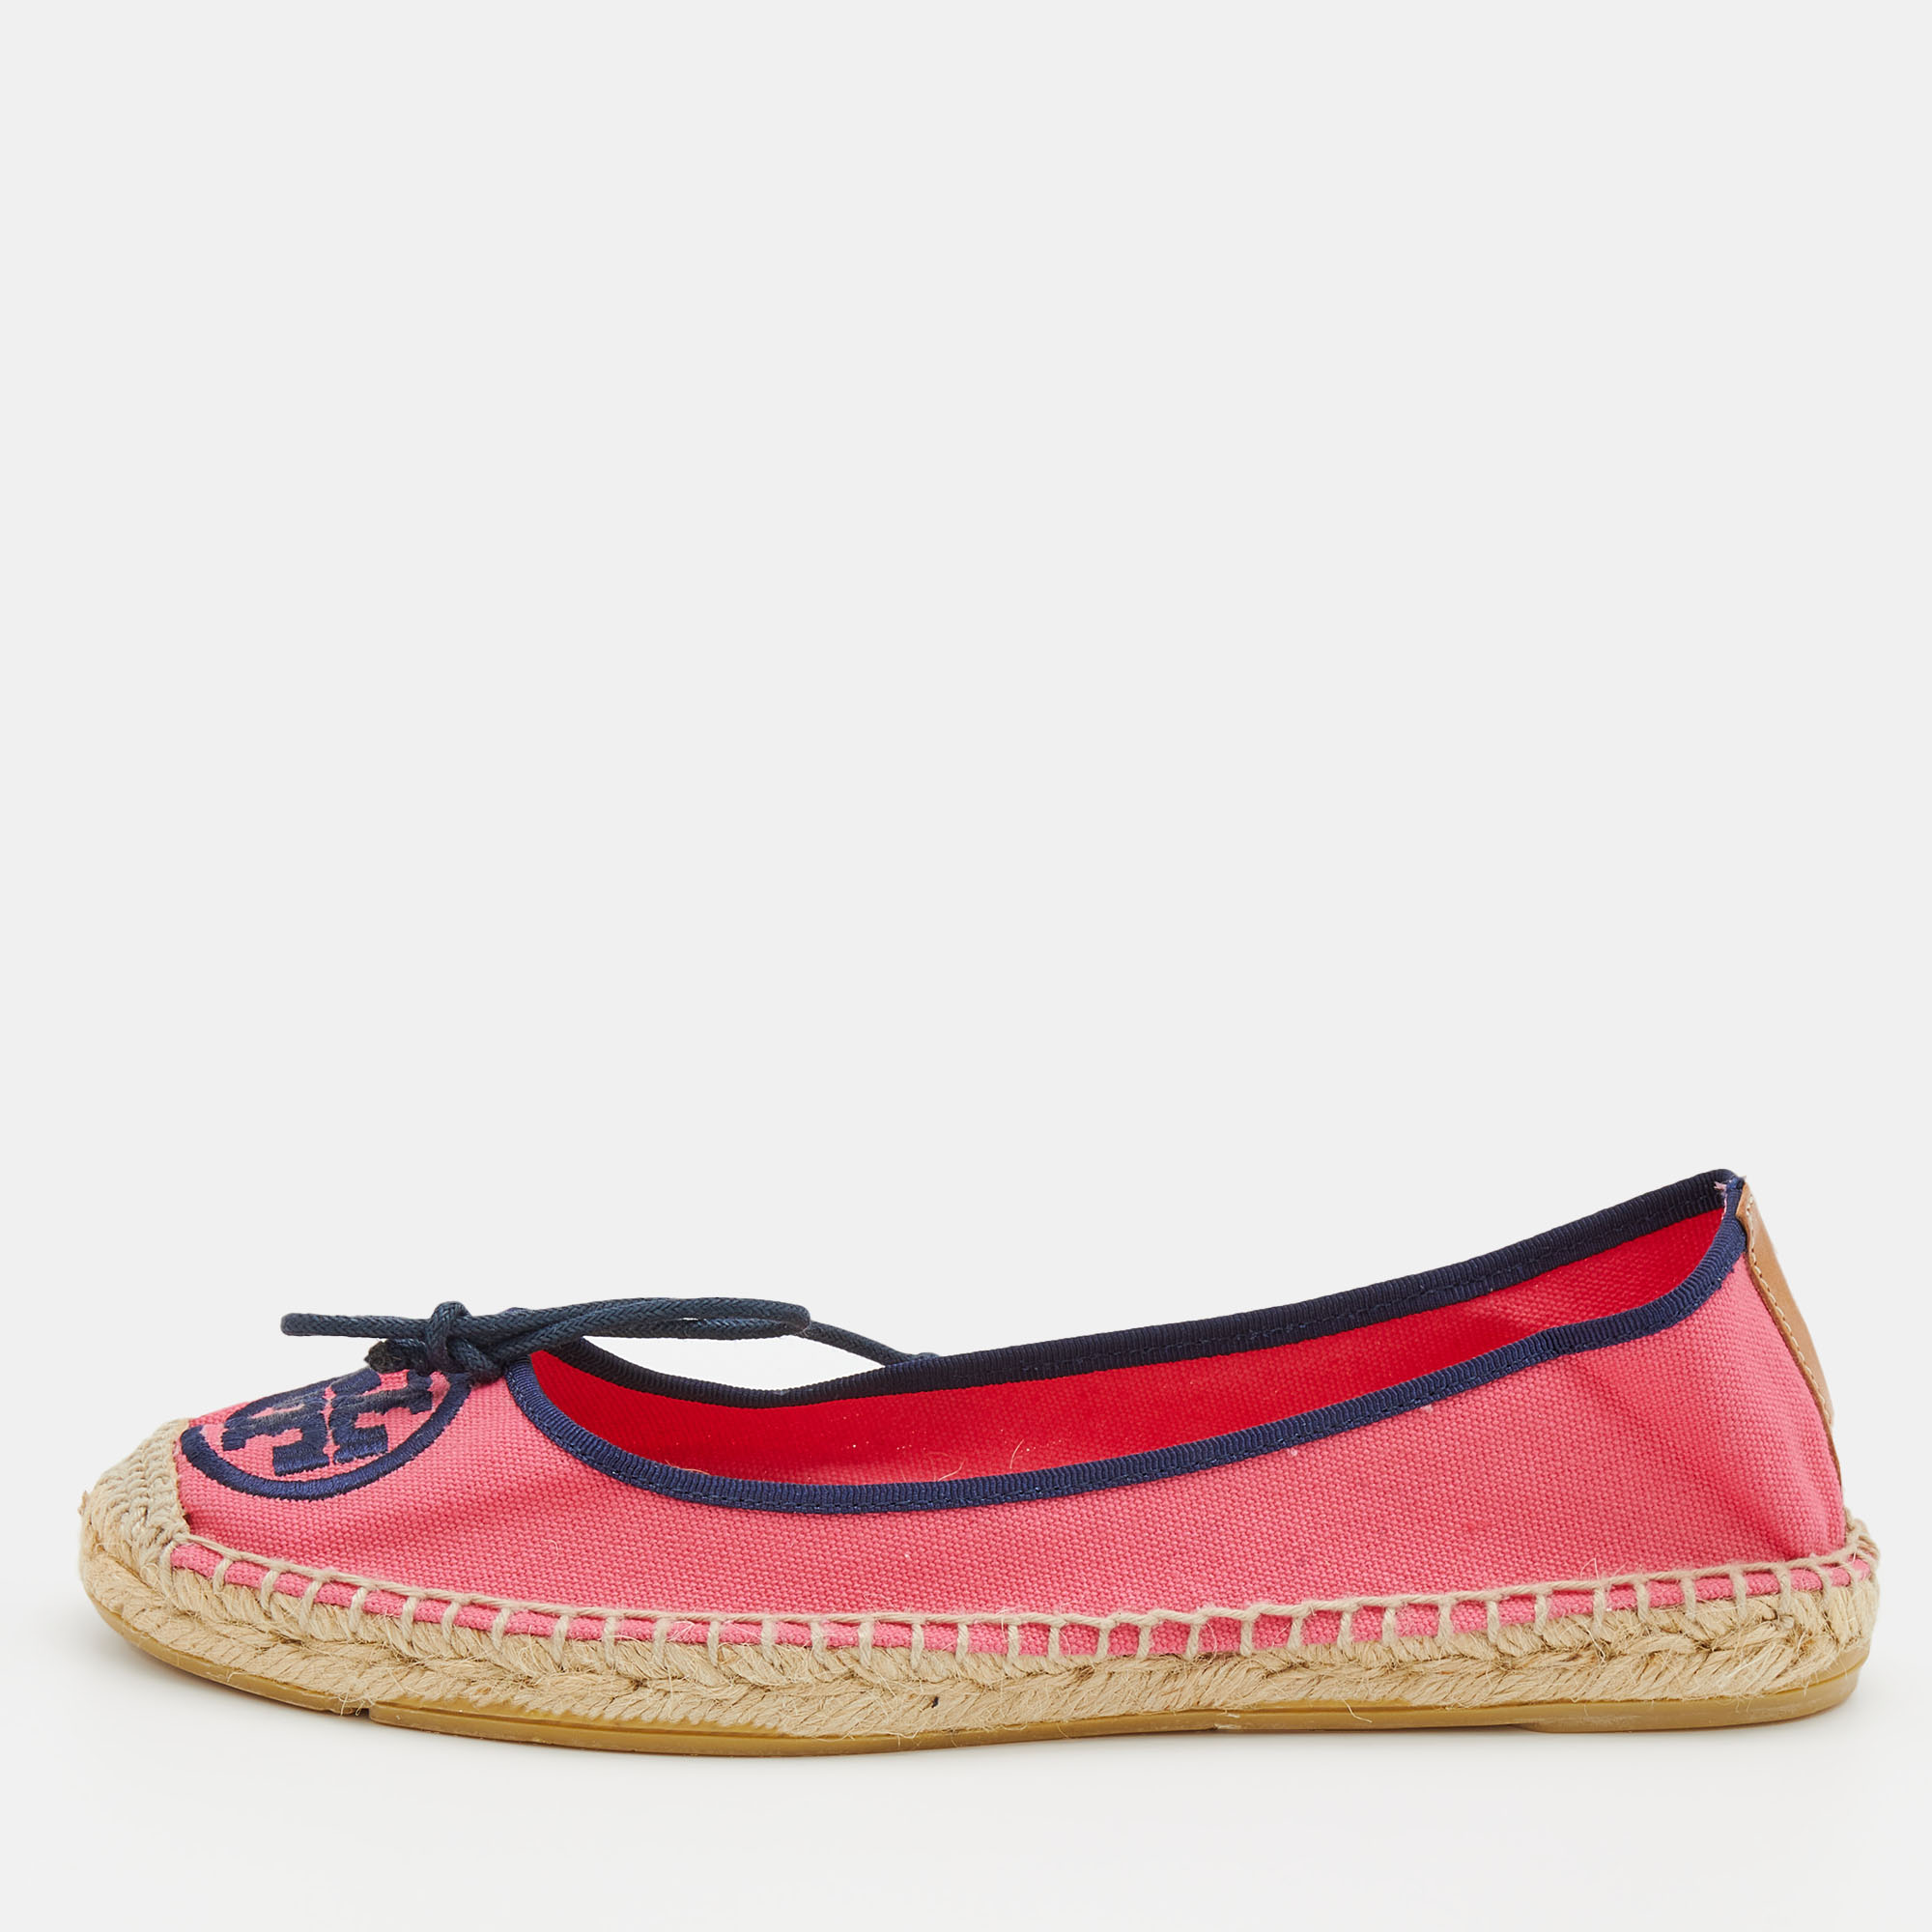 Pre-owned Tory Burch Pink Canvas Espadrille Ballet Flats Size 38